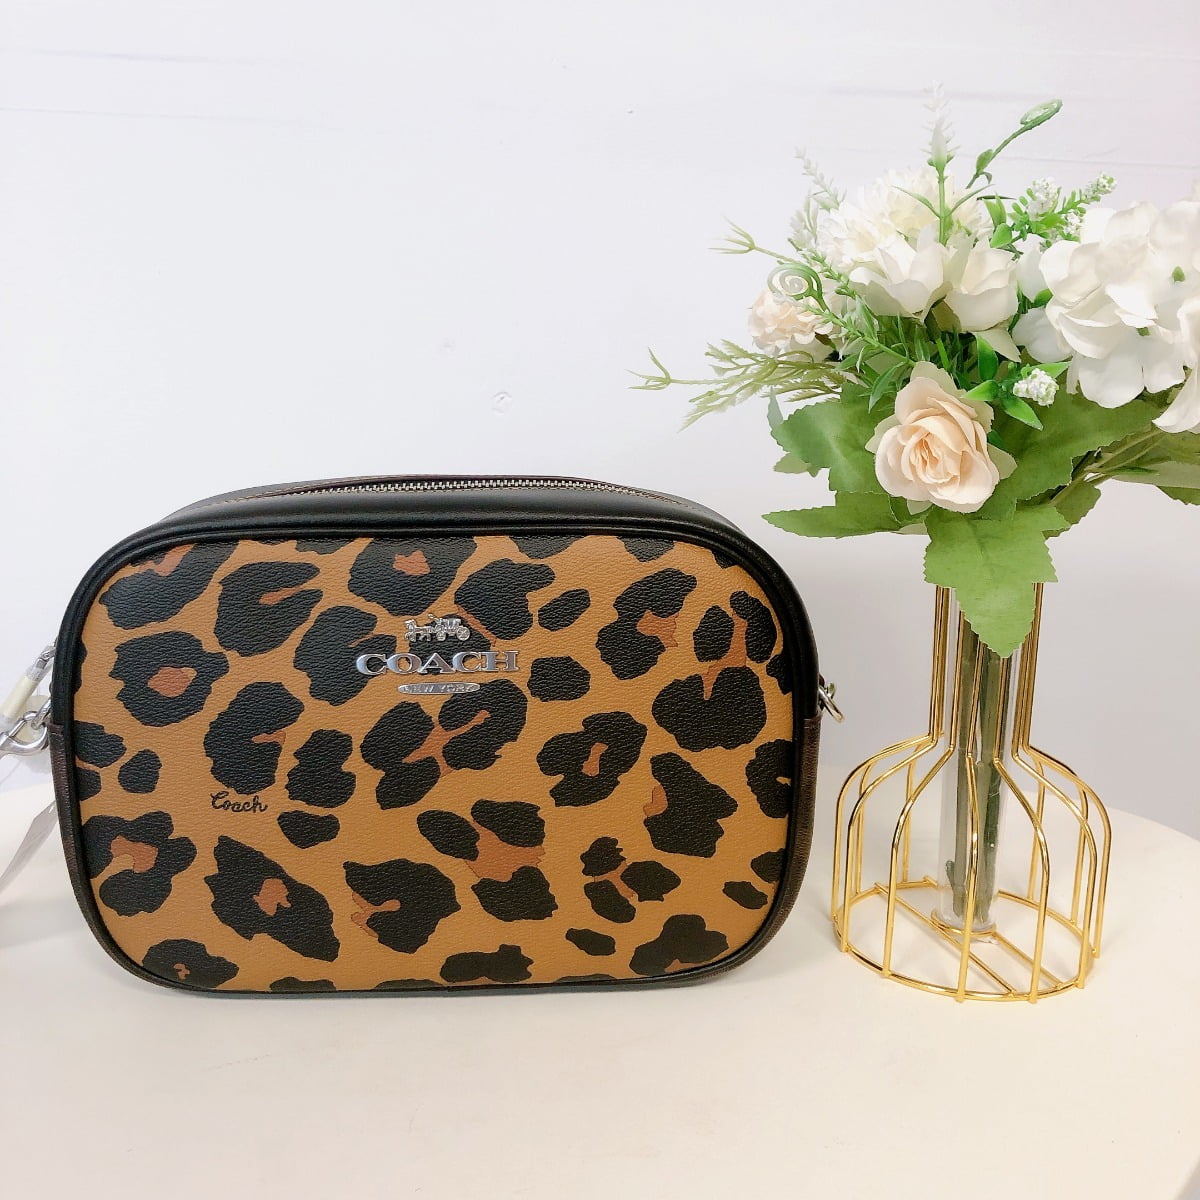 Coach leopard Print Reversible Signature Brown Black/ Wallet Options NWT  Gift | eBay